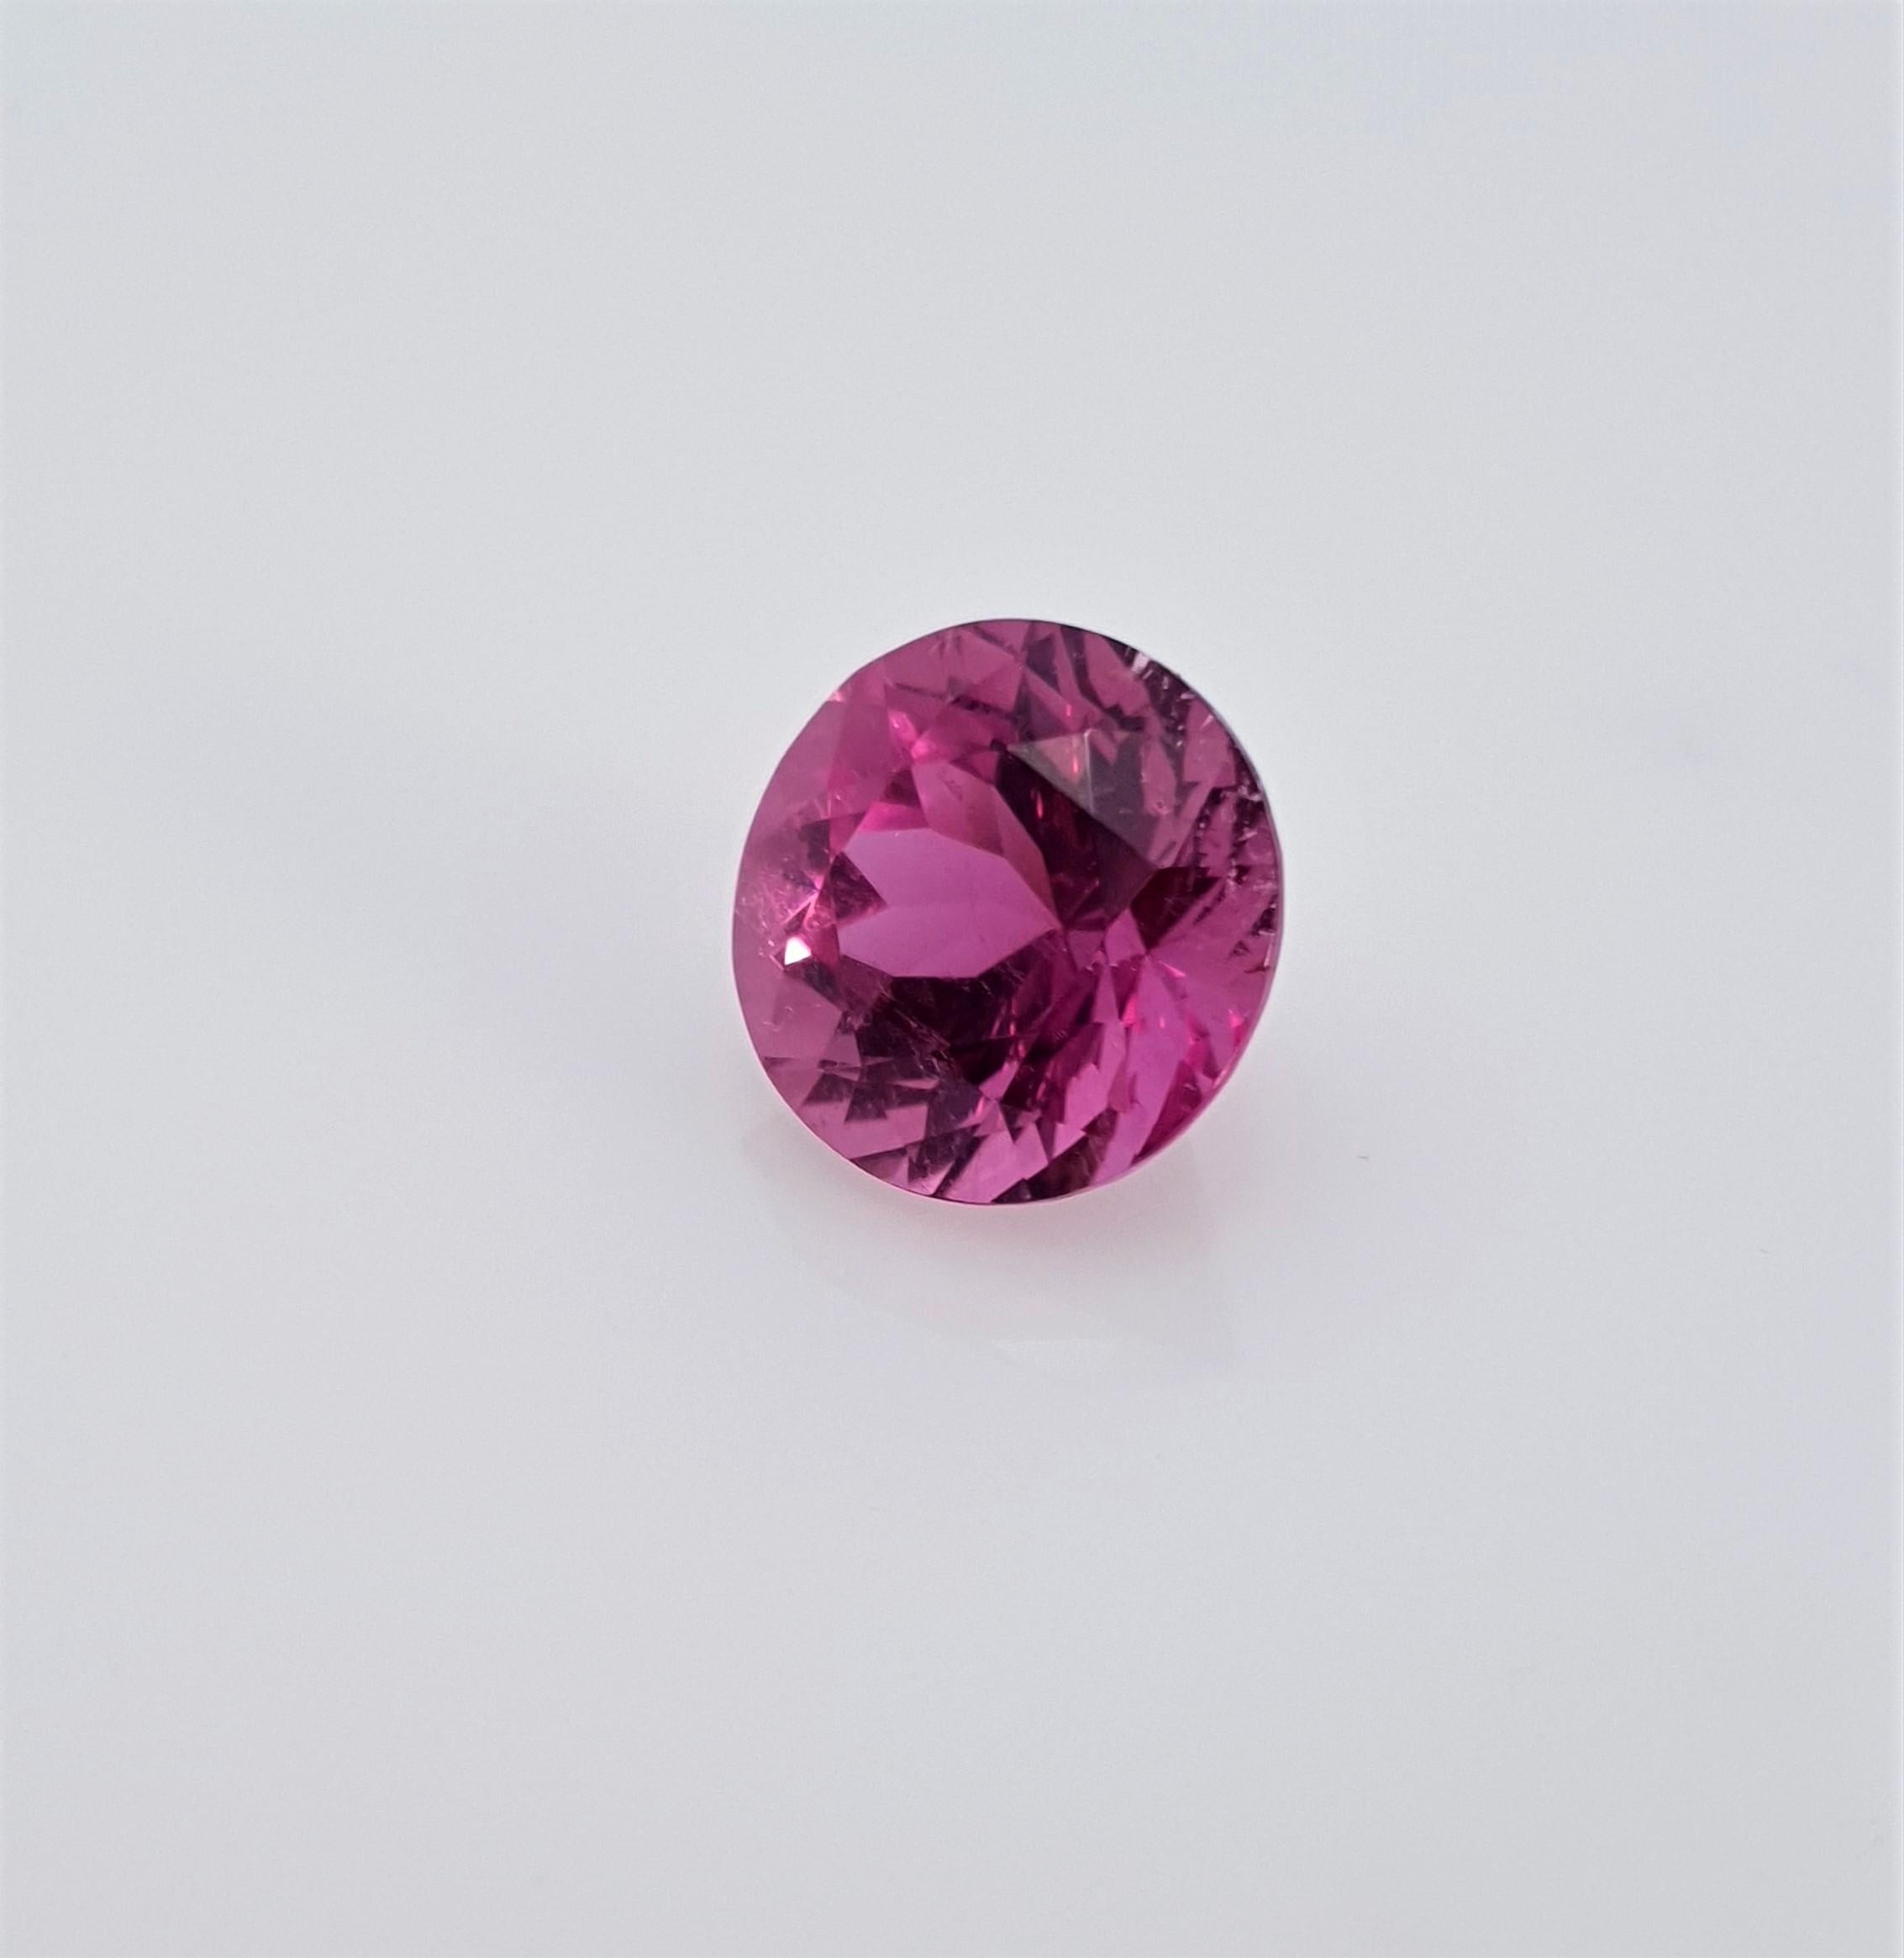 We are delighted to be able to offer, this 8,57 ct. vivid violet Rubelite from our collection.
This beautiful gem has a vivid violet pink color and a great fire. Cutting and proportion enable an very high light return from every angle!
The stone has